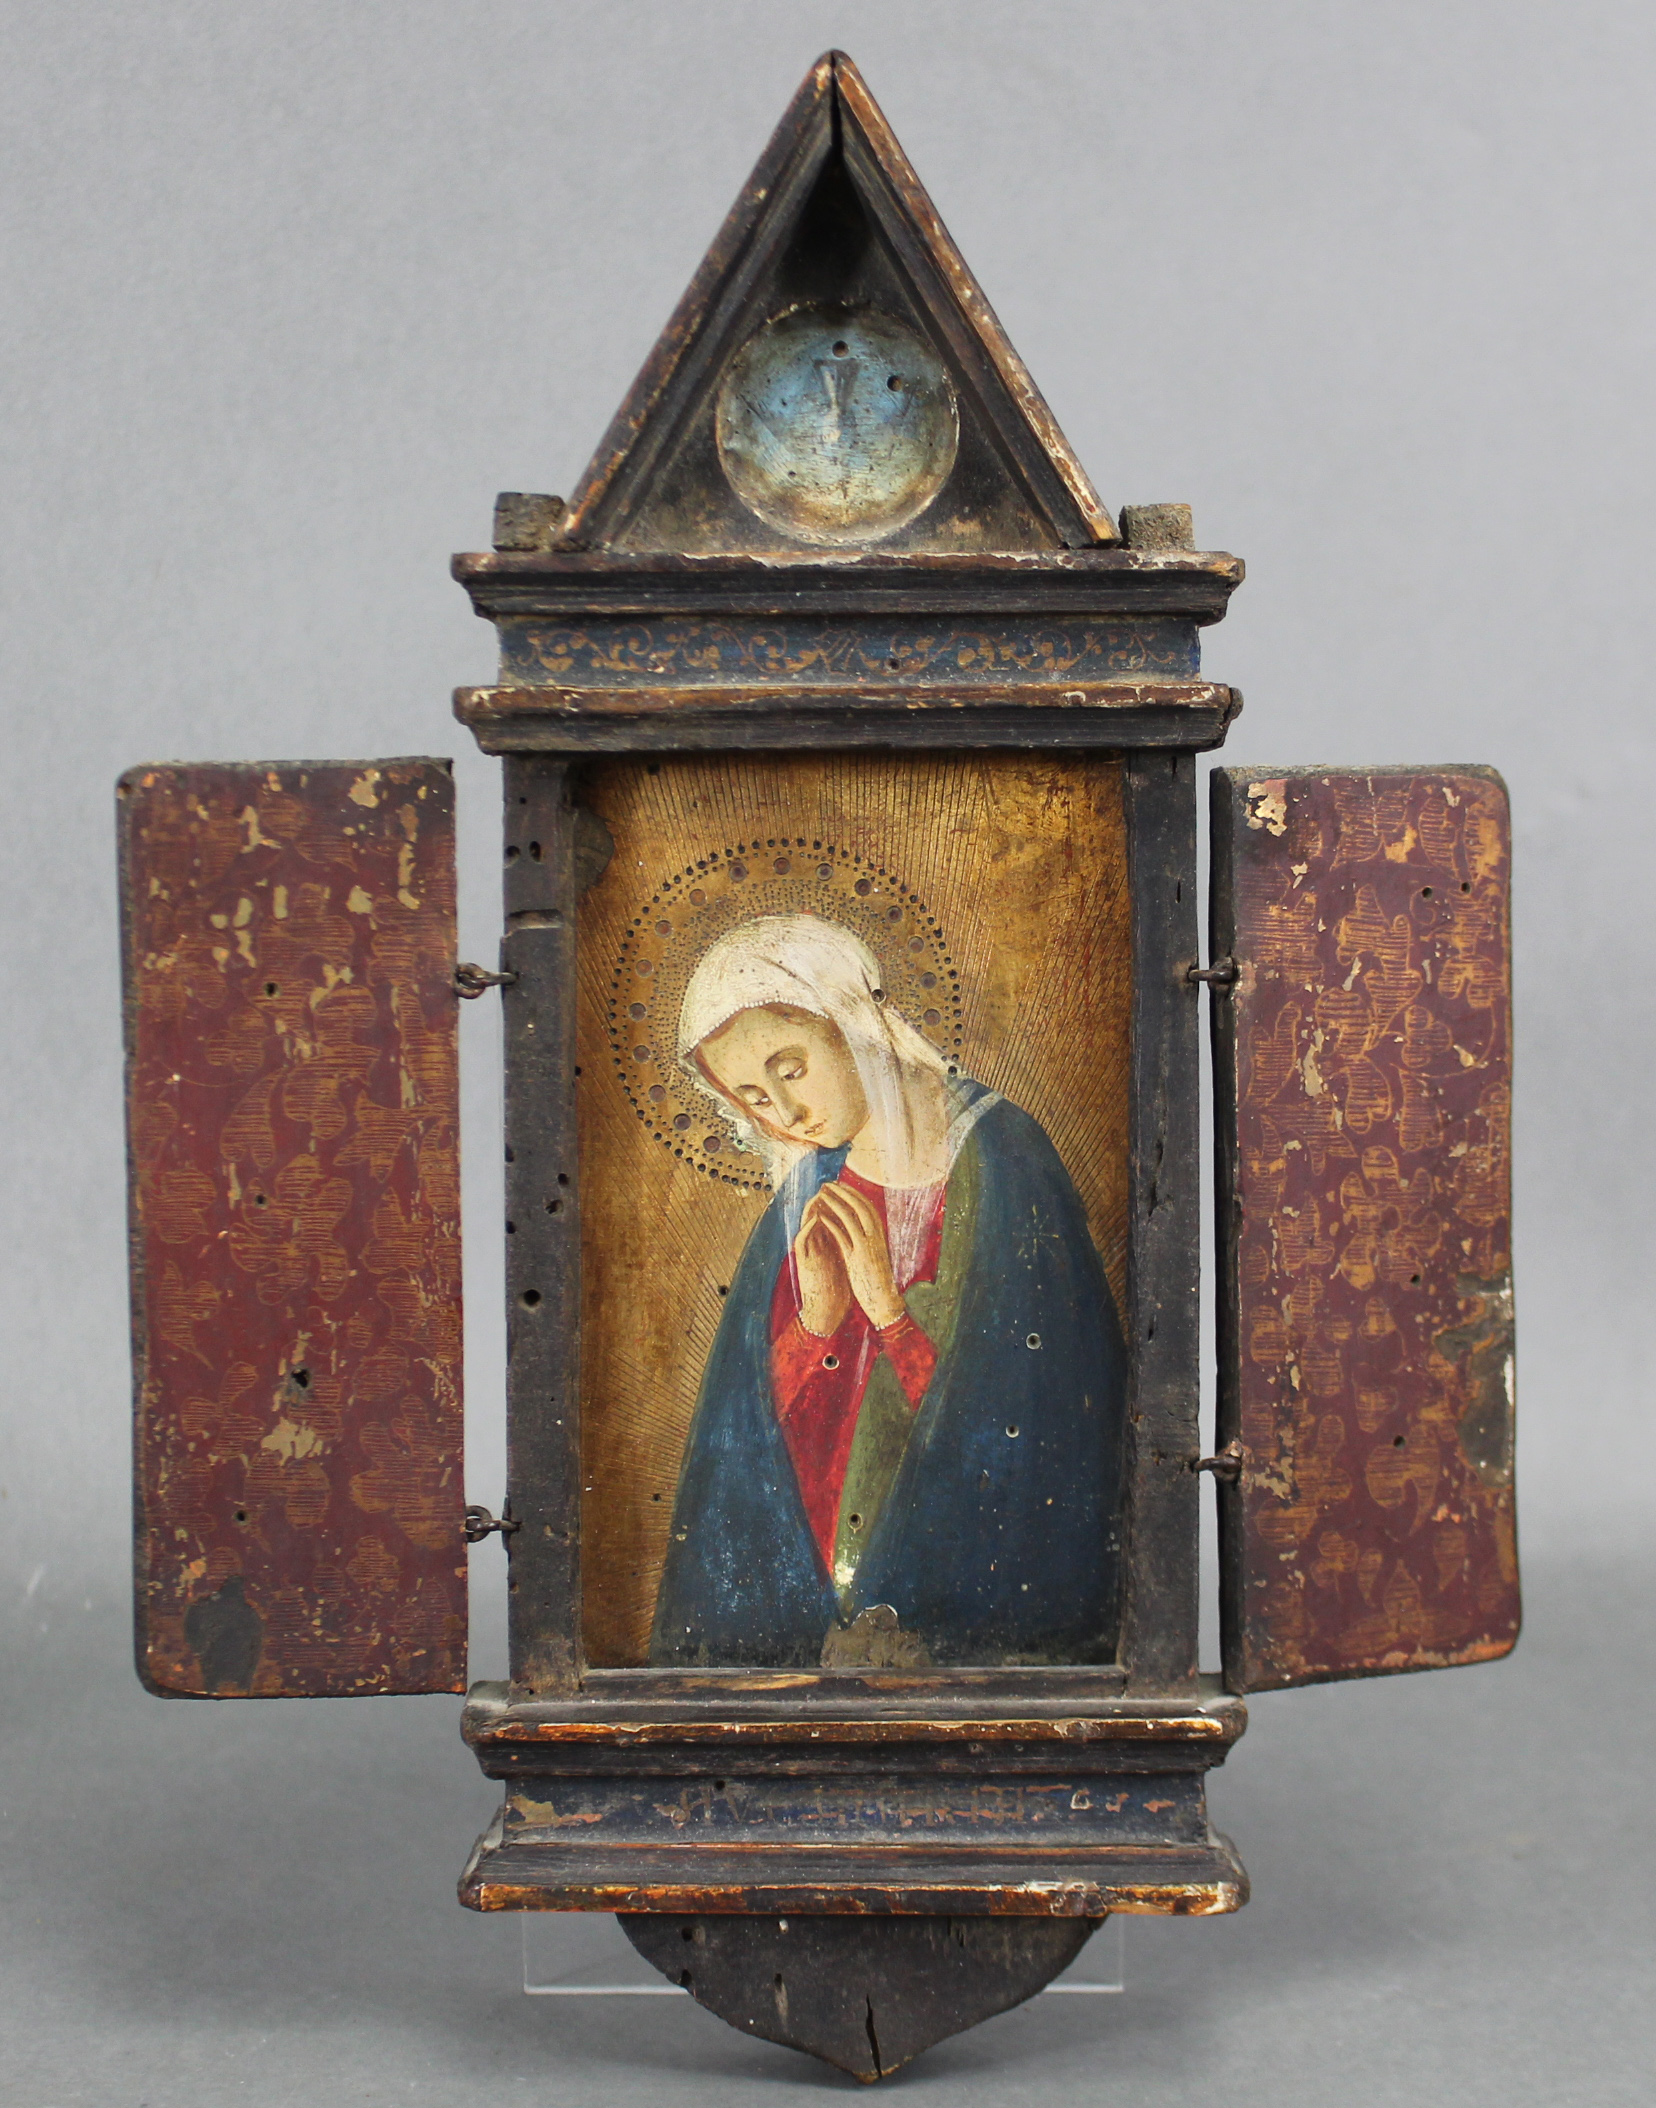 An Italian renaissance style tabernacle with half-length portrait of the Madonna painted in oils &